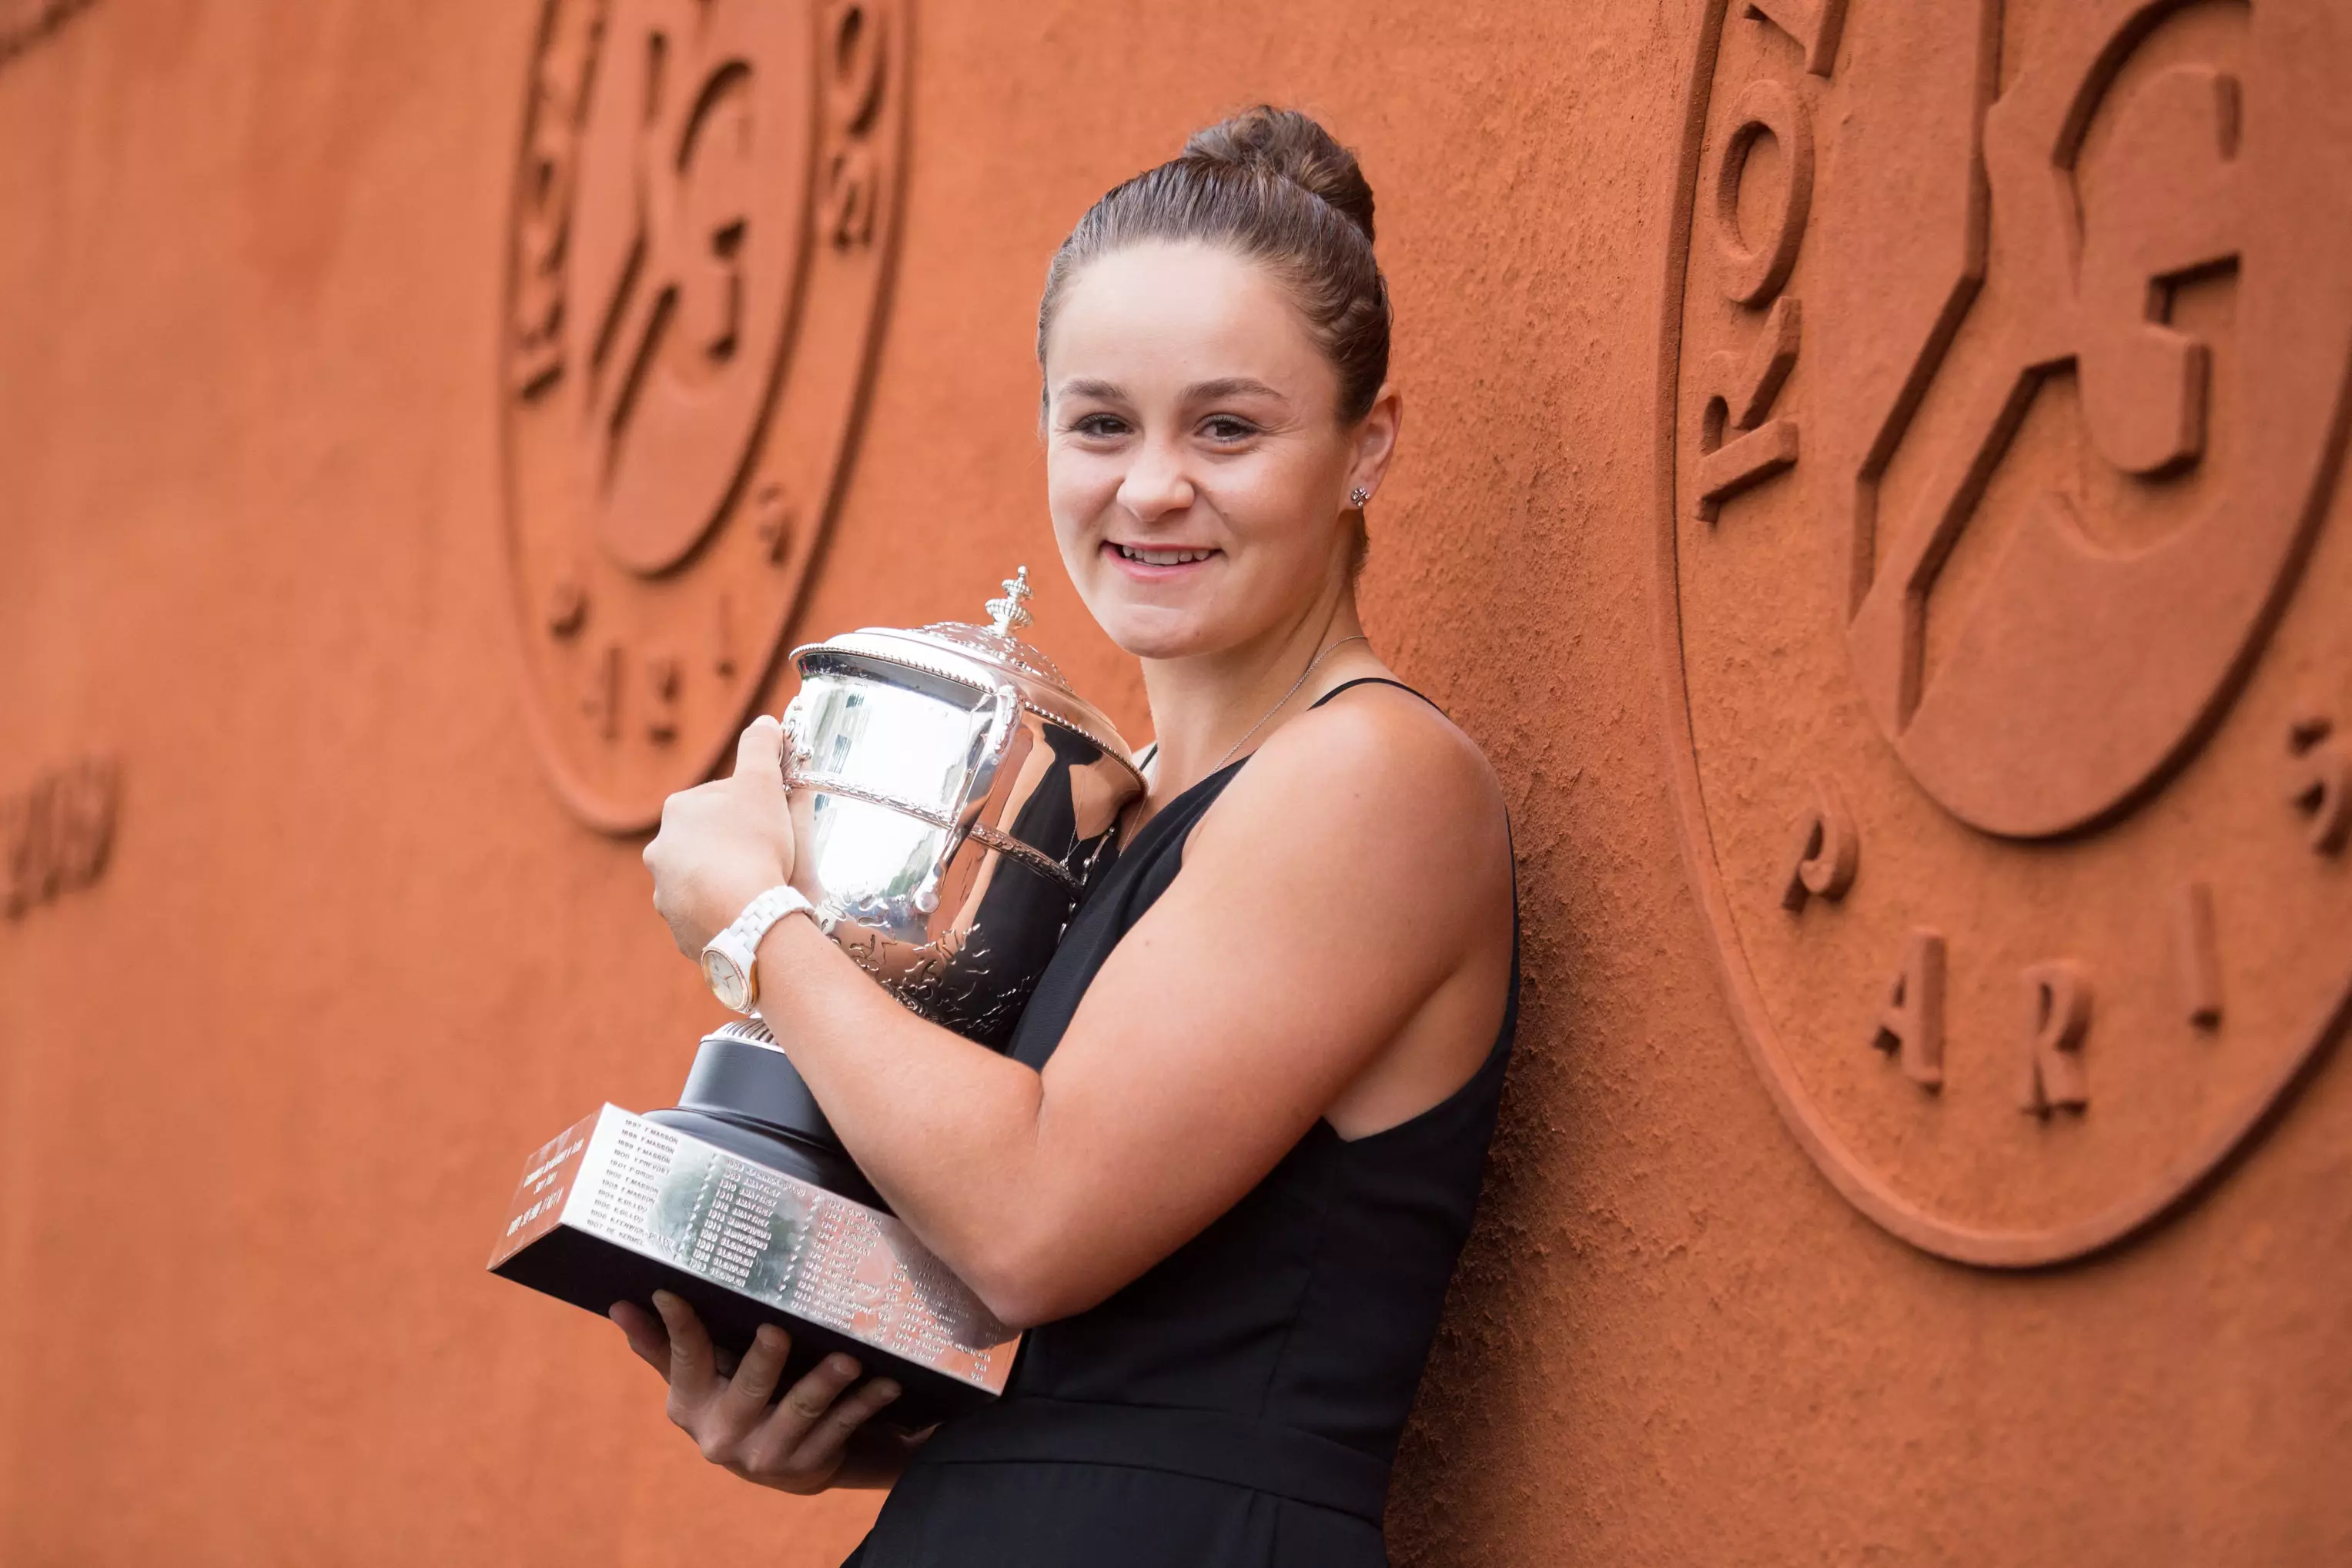 Ash Barty won her very first grand slam at the French Open in 2019.